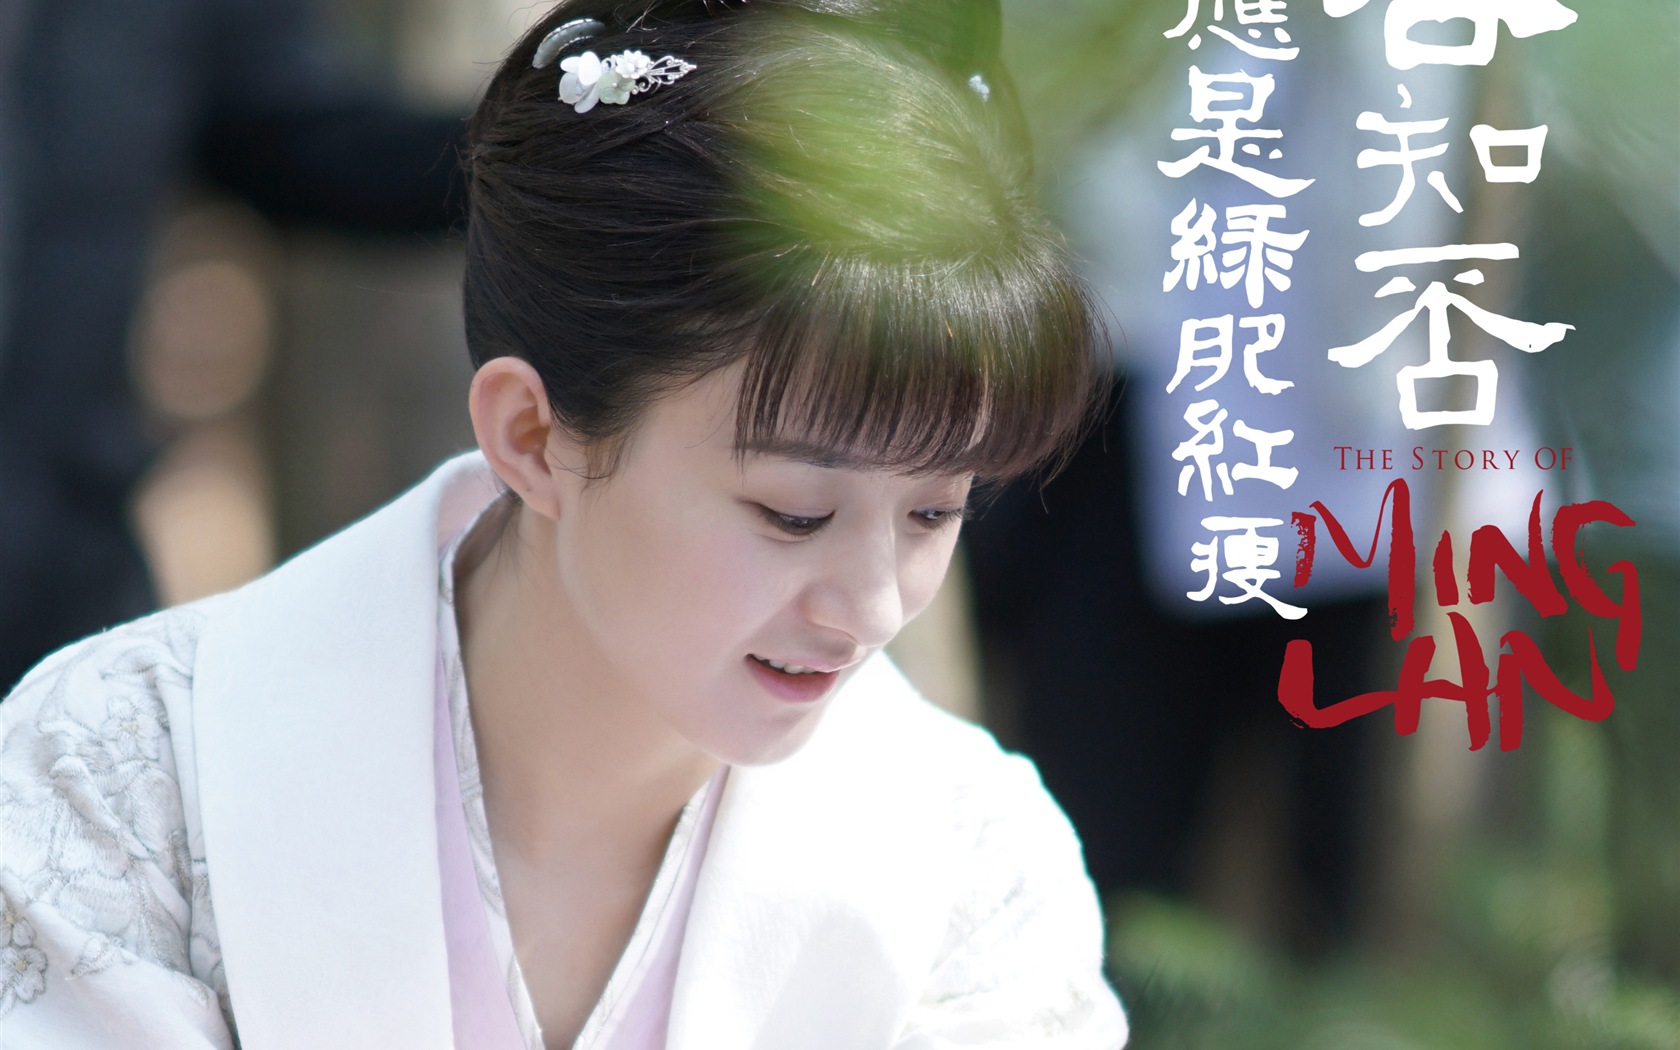 The Story Of MingLan, TV series HD wallpapers #27 - 1680x1050